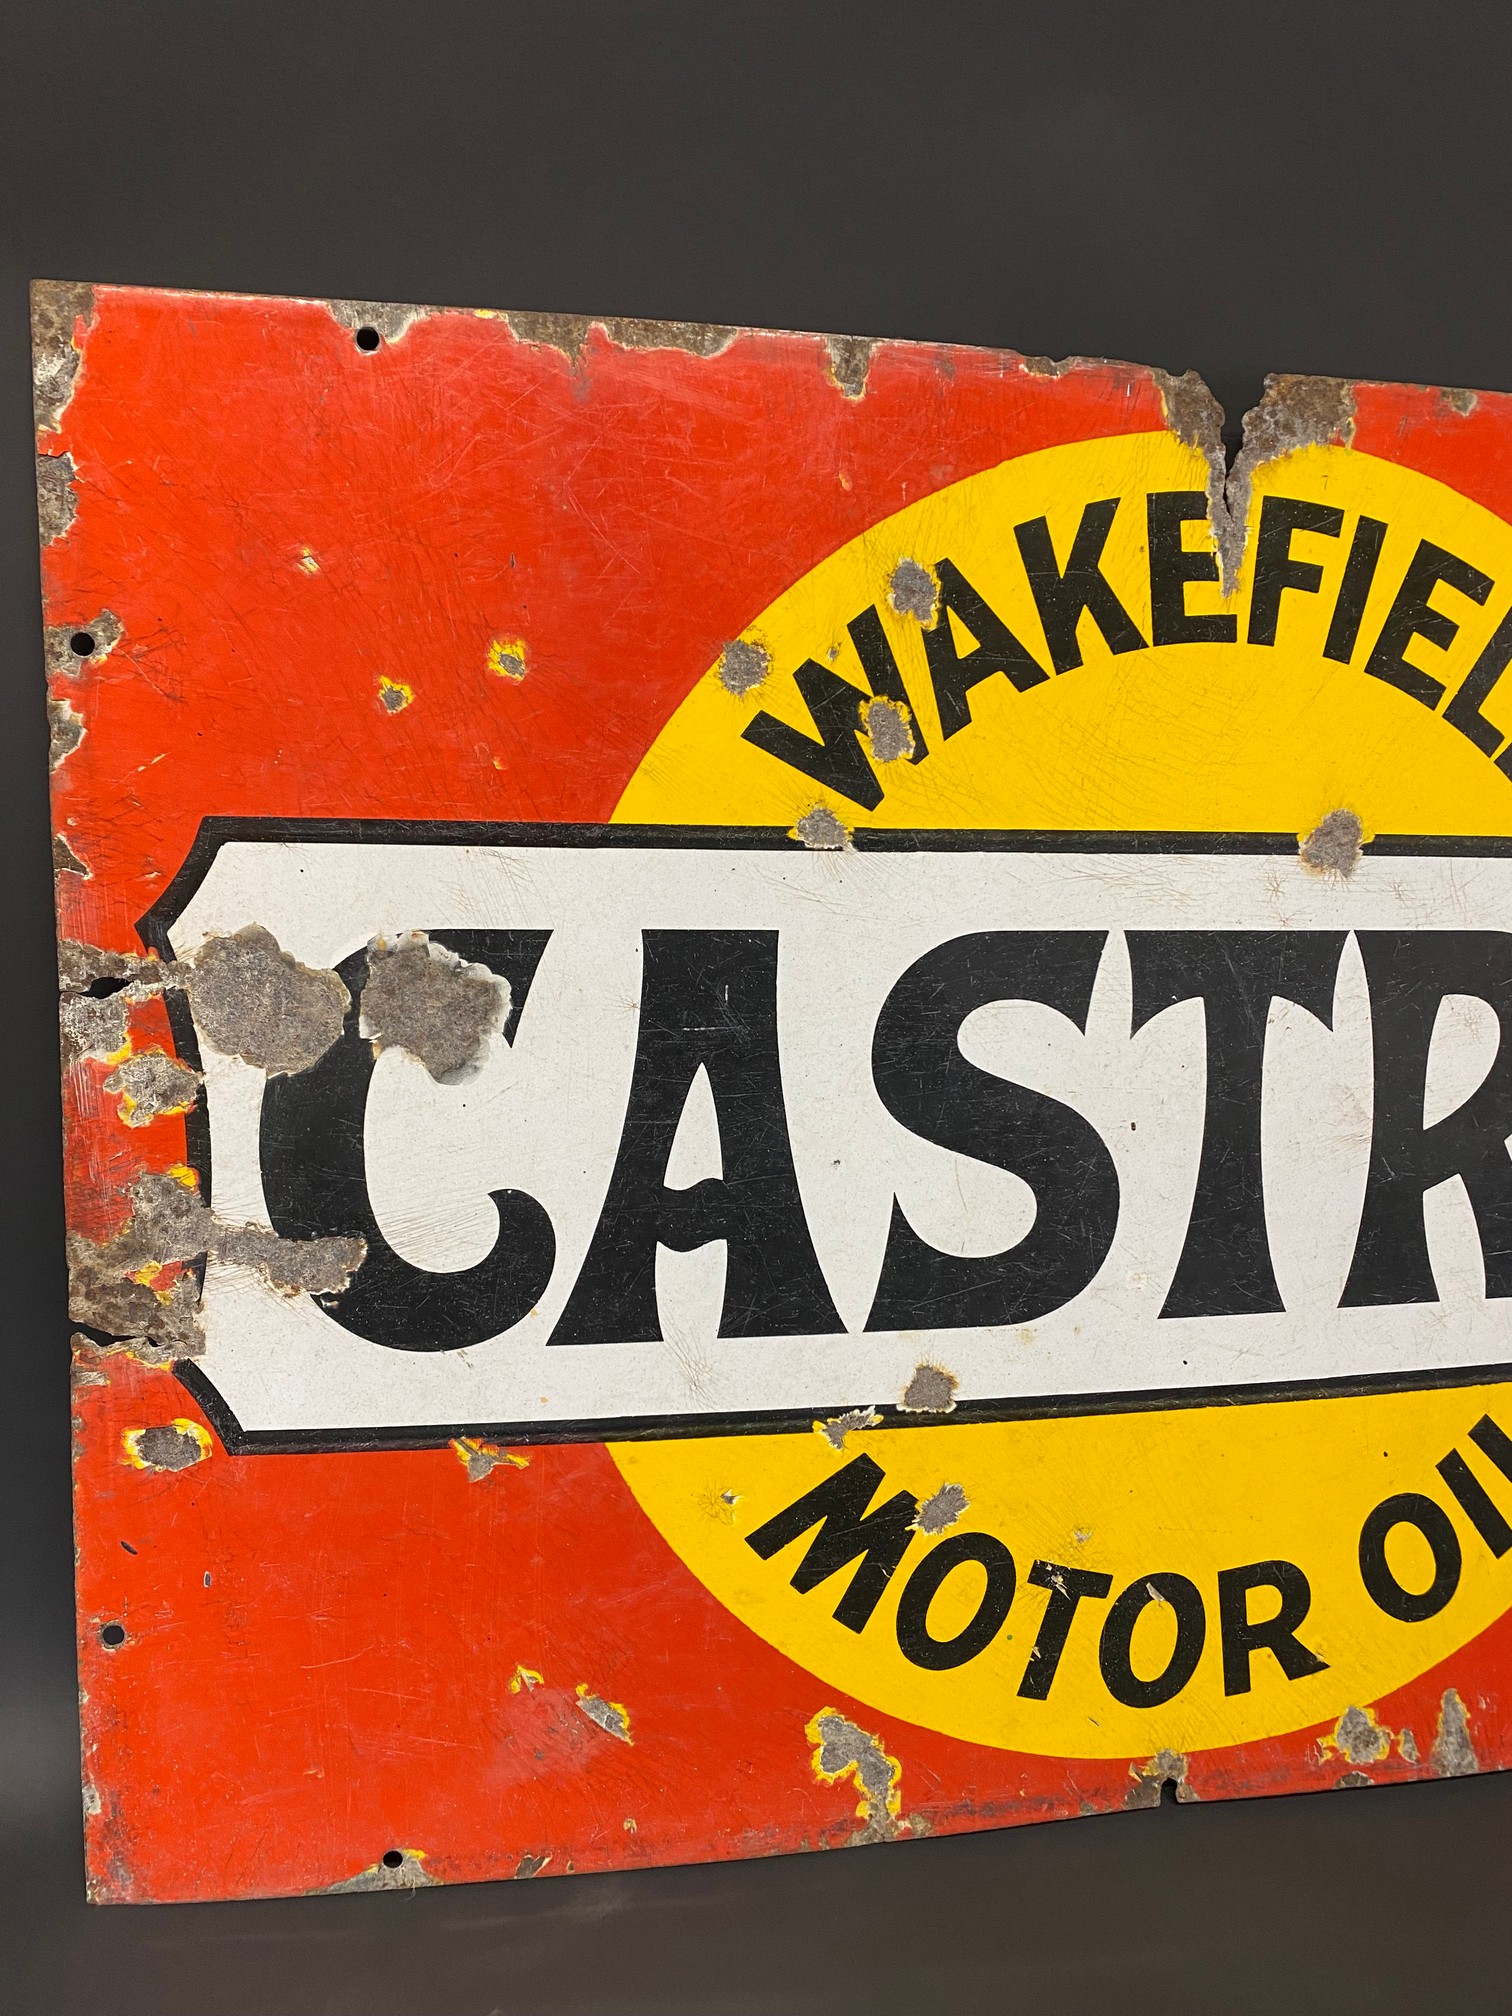 A Wakefield Castrol Motor Oil rectangular enamel sign by Bruton of Palmers Green, 30 x 20". - Image 4 of 5